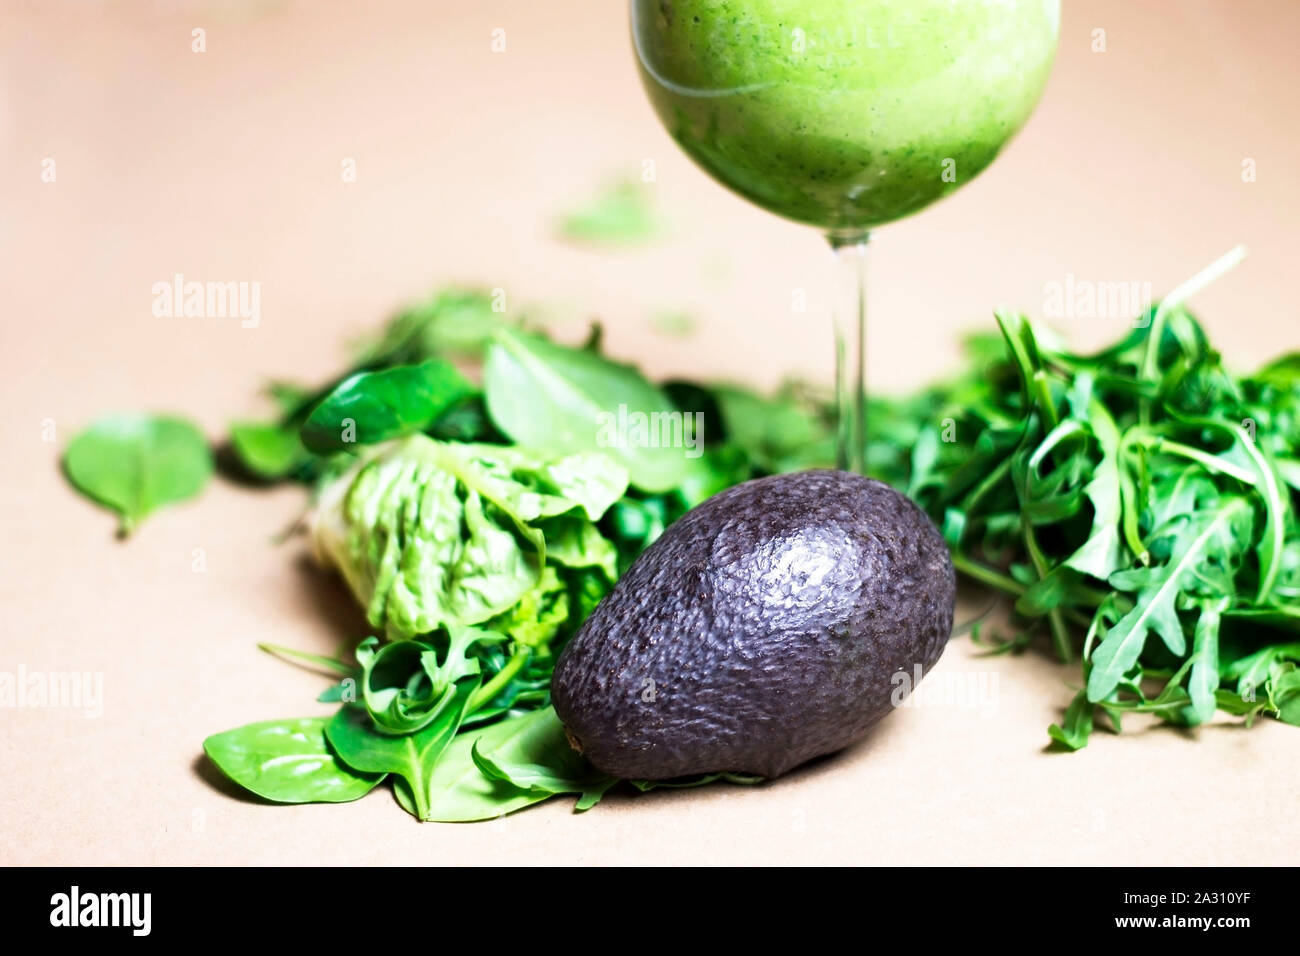 Green detox smoothie. Heatlhy eating concept. Stock Photo